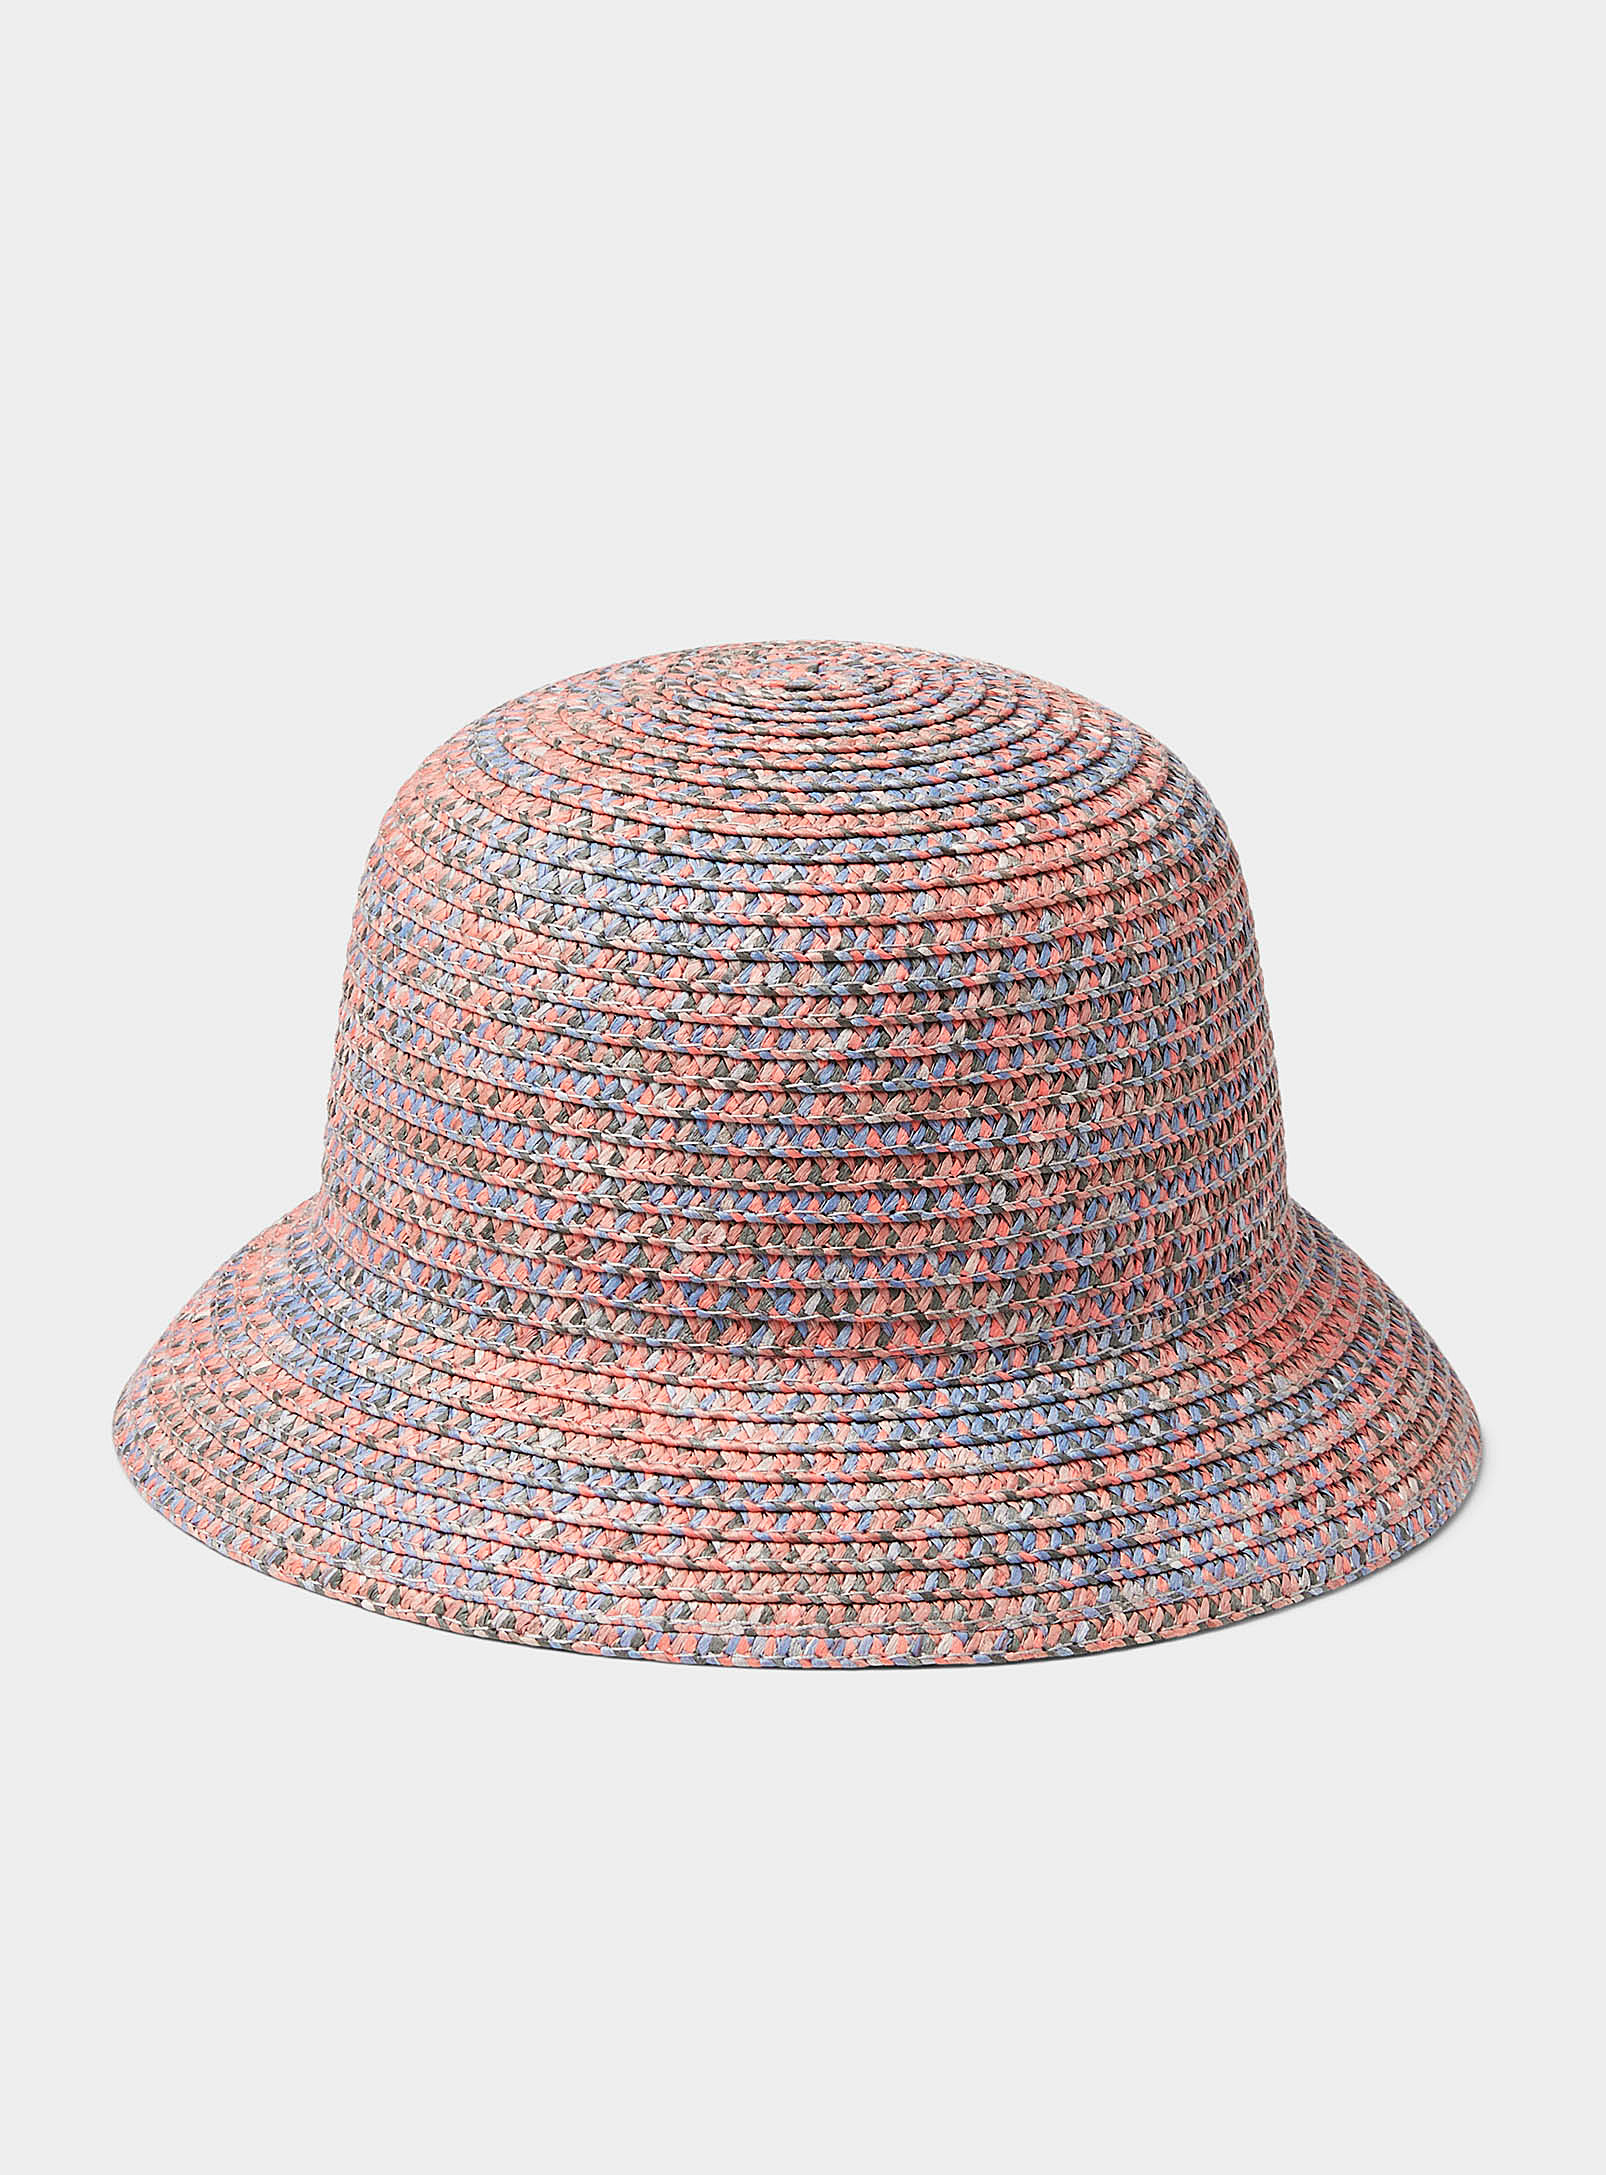 Simons - Women's Colourful braided straw Cloche Hat